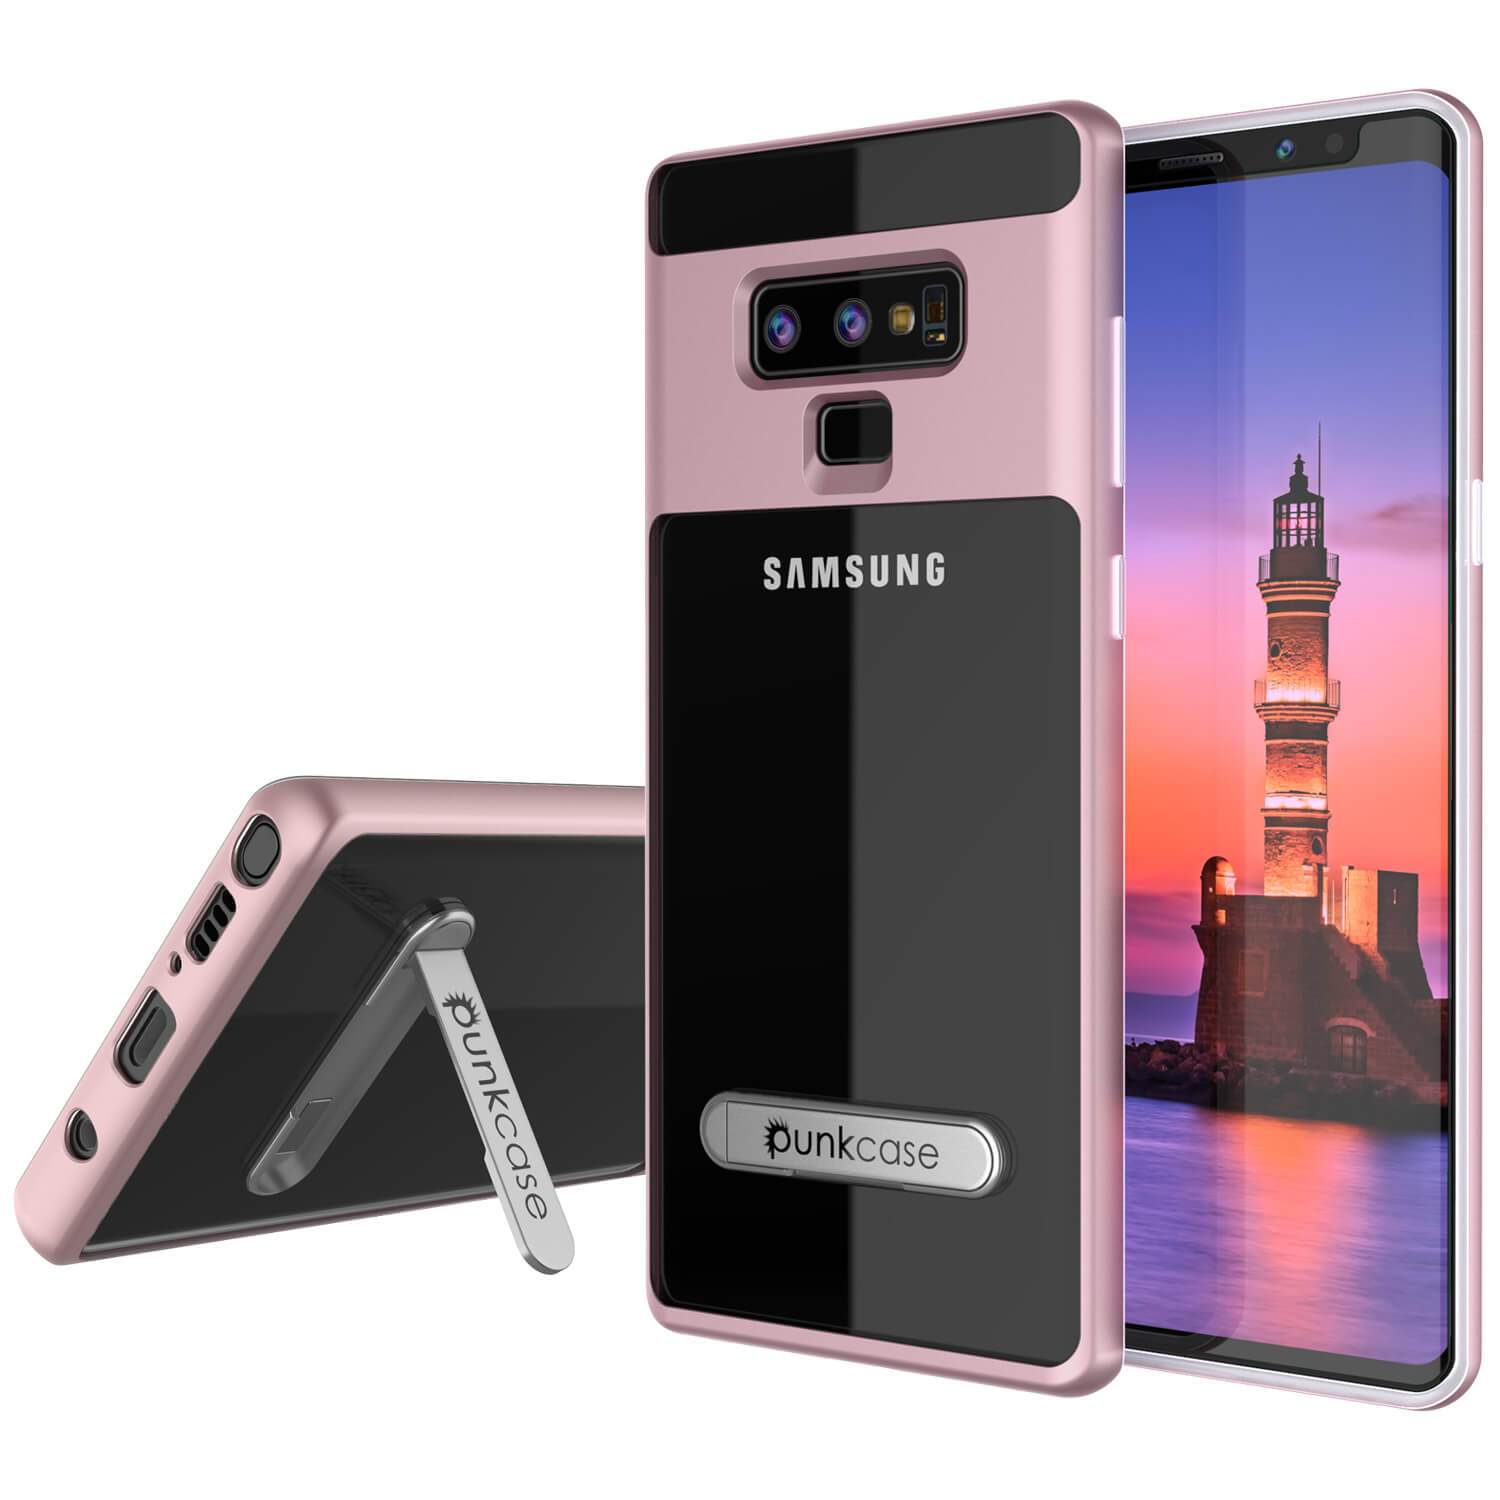 Galaxy Note 9 Lucid 3.0 PunkCase Armor Cover w/Integrated Kickstand and Screen Protector [Rose Gold]